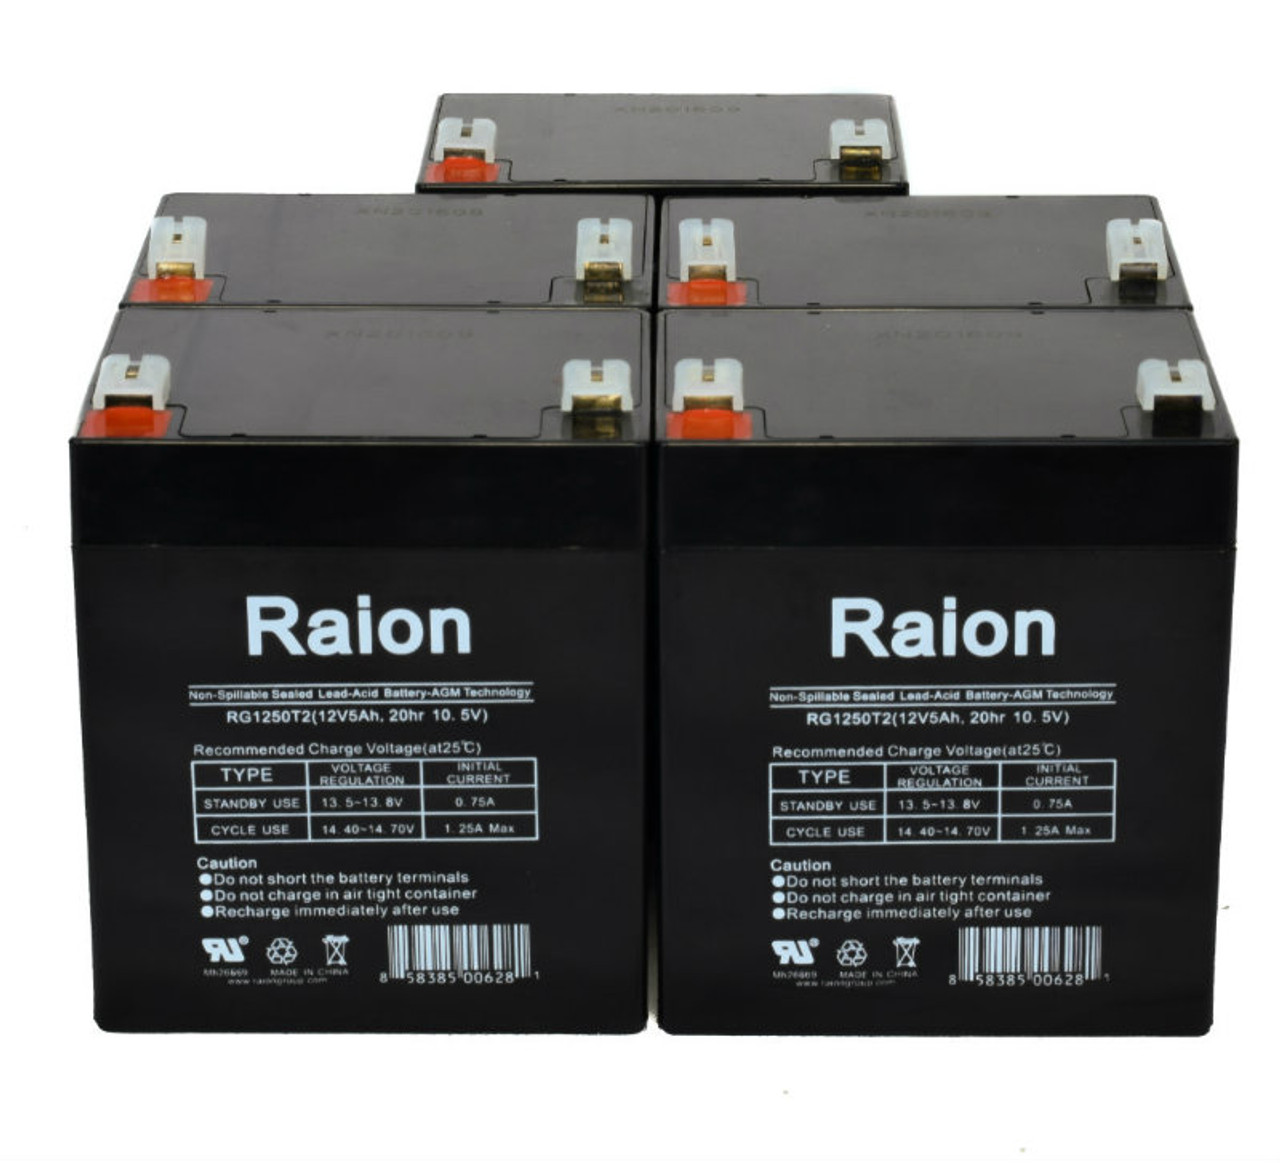 Raion Power RG1250T1 Replacement Battery for Zeus Battery PC4.5-12 - (5 Pack)